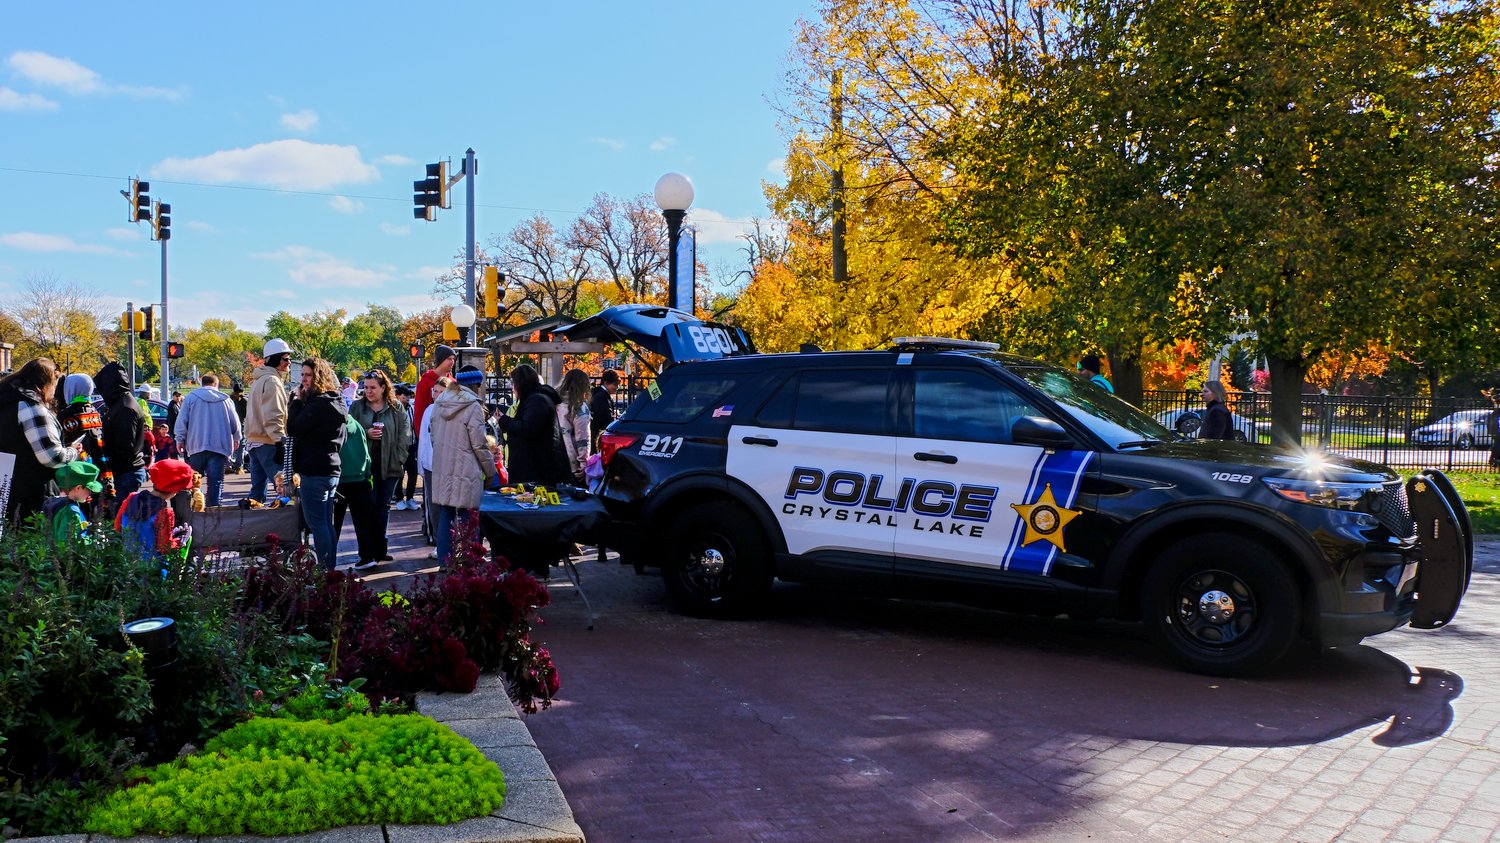 Crystal Lake Police handing out candy.